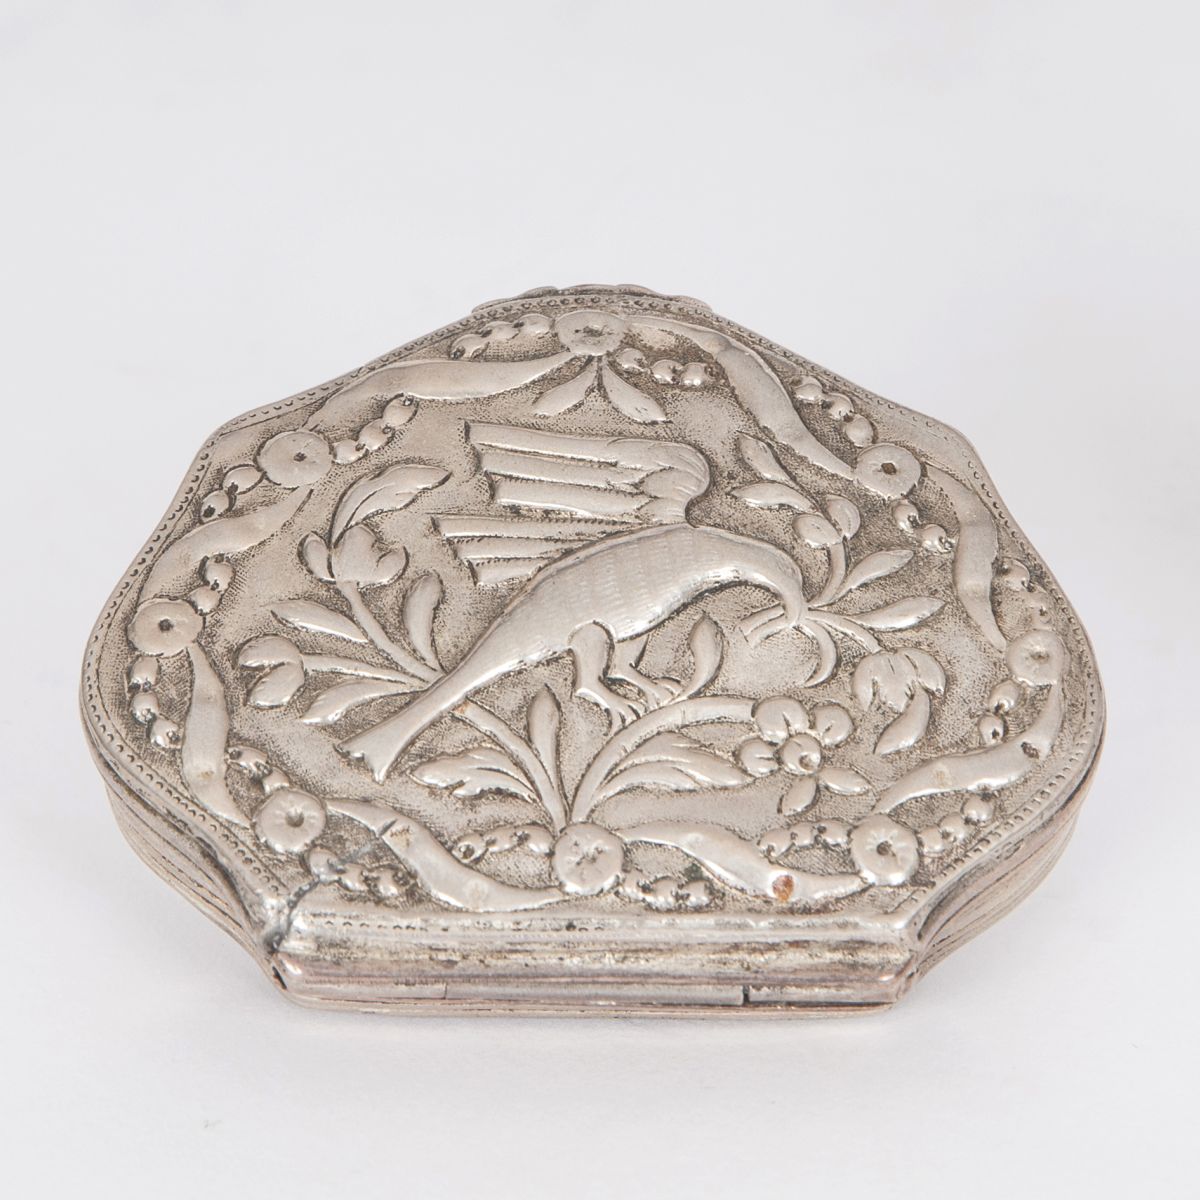 A small snuff-box with scenery of a bird